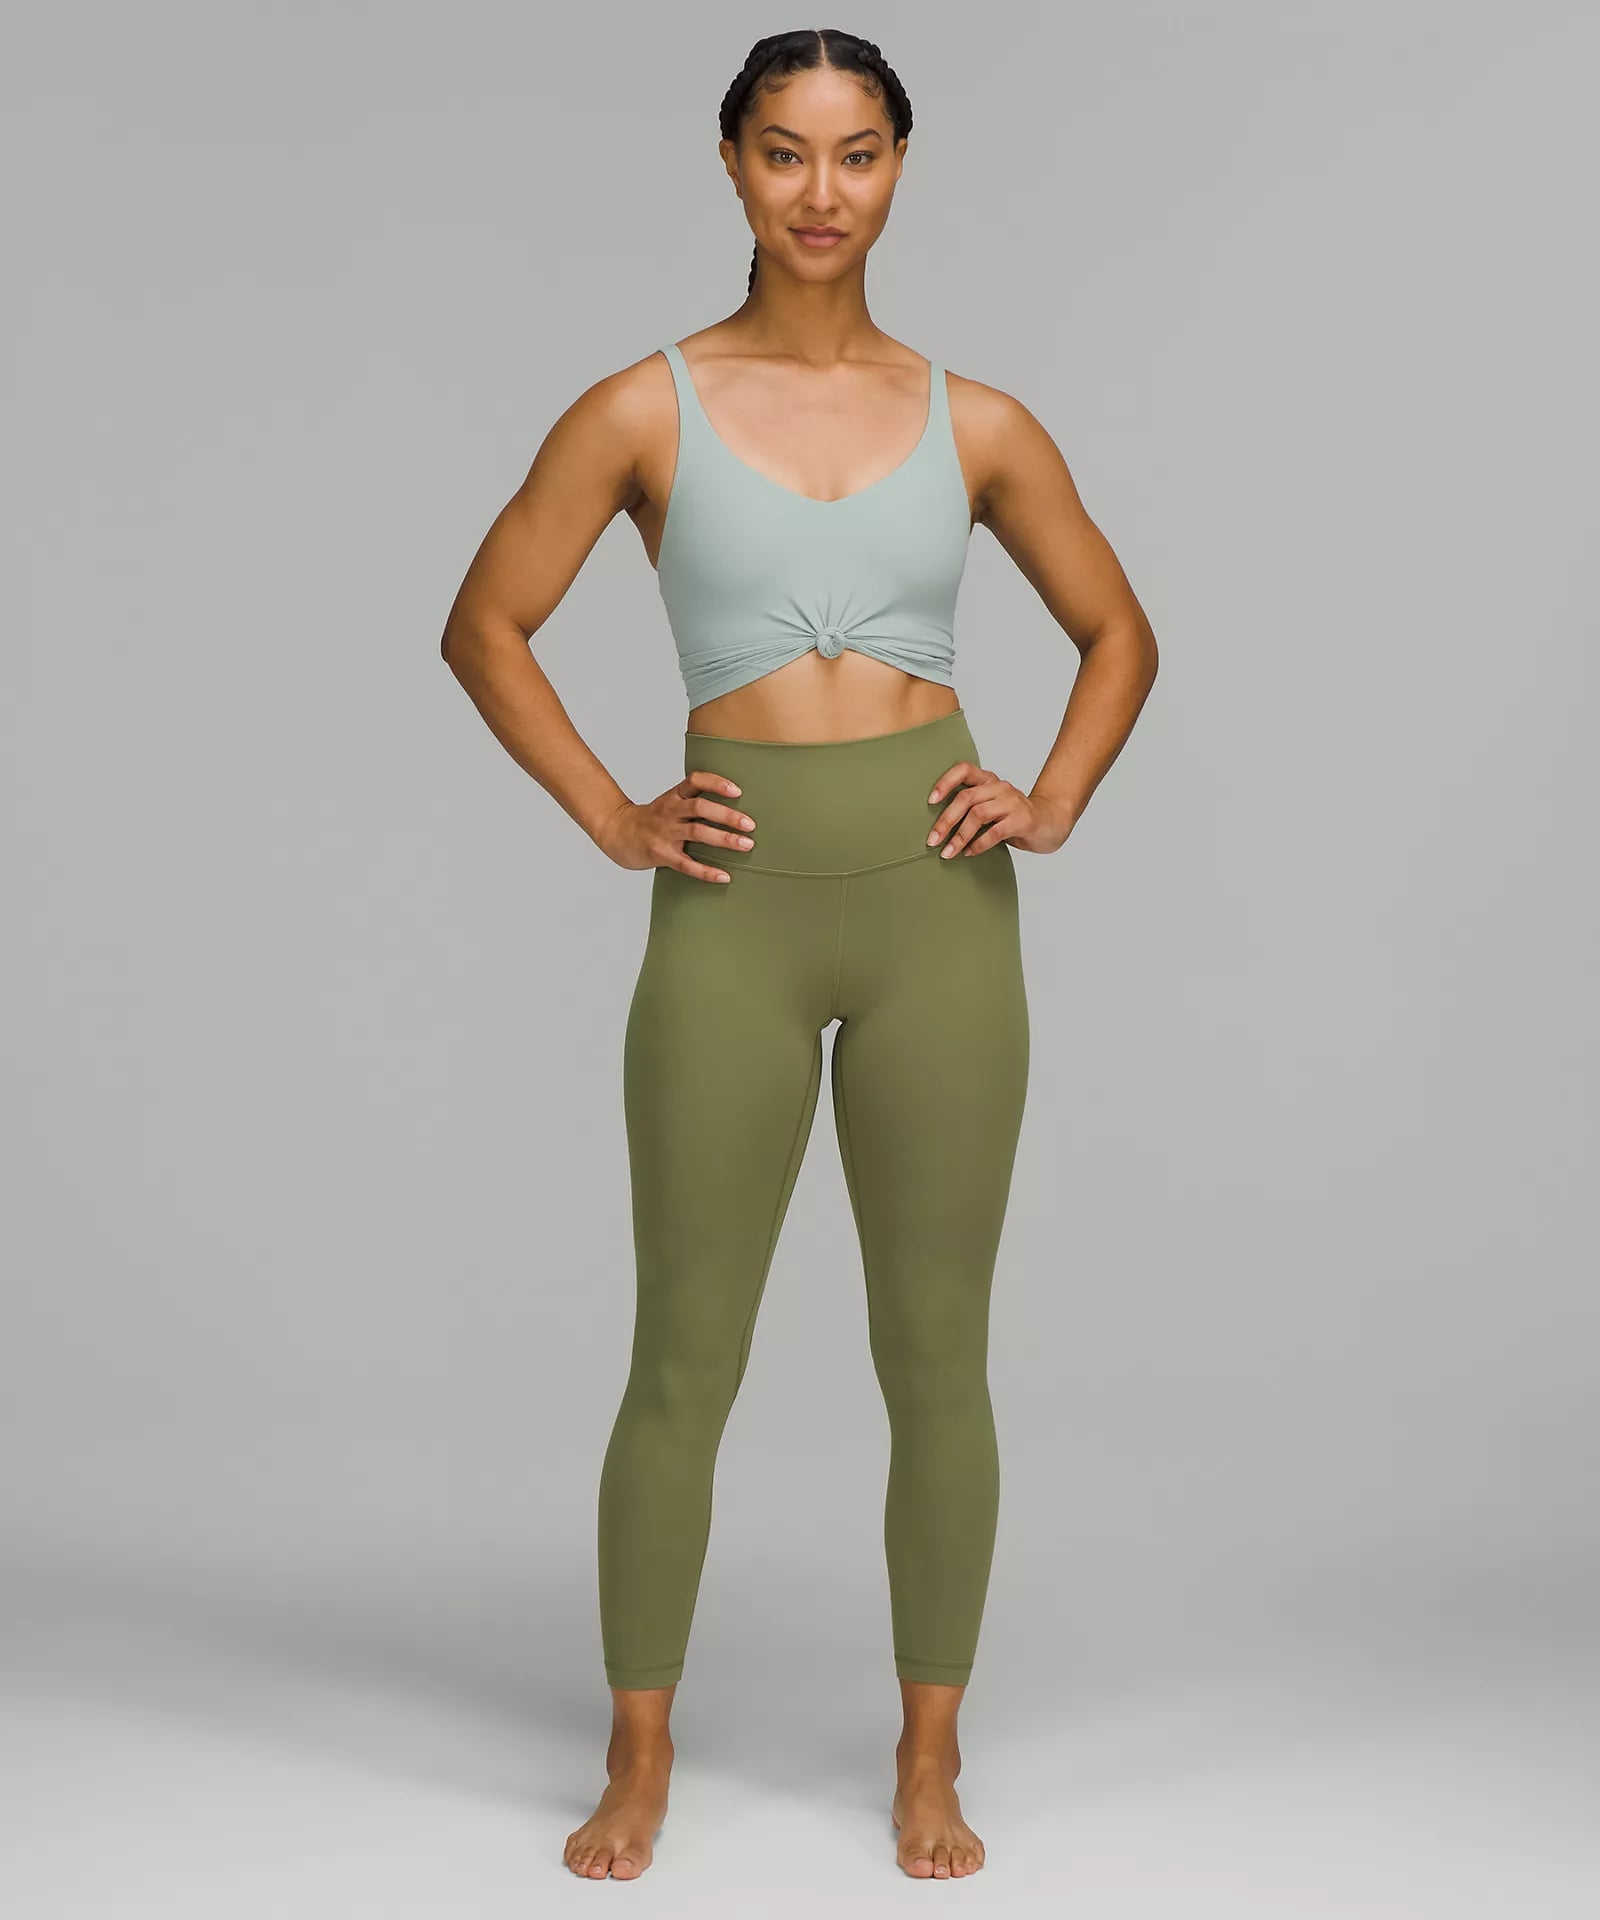 The 15 Best HighWaisted Workout Leggings of 2023